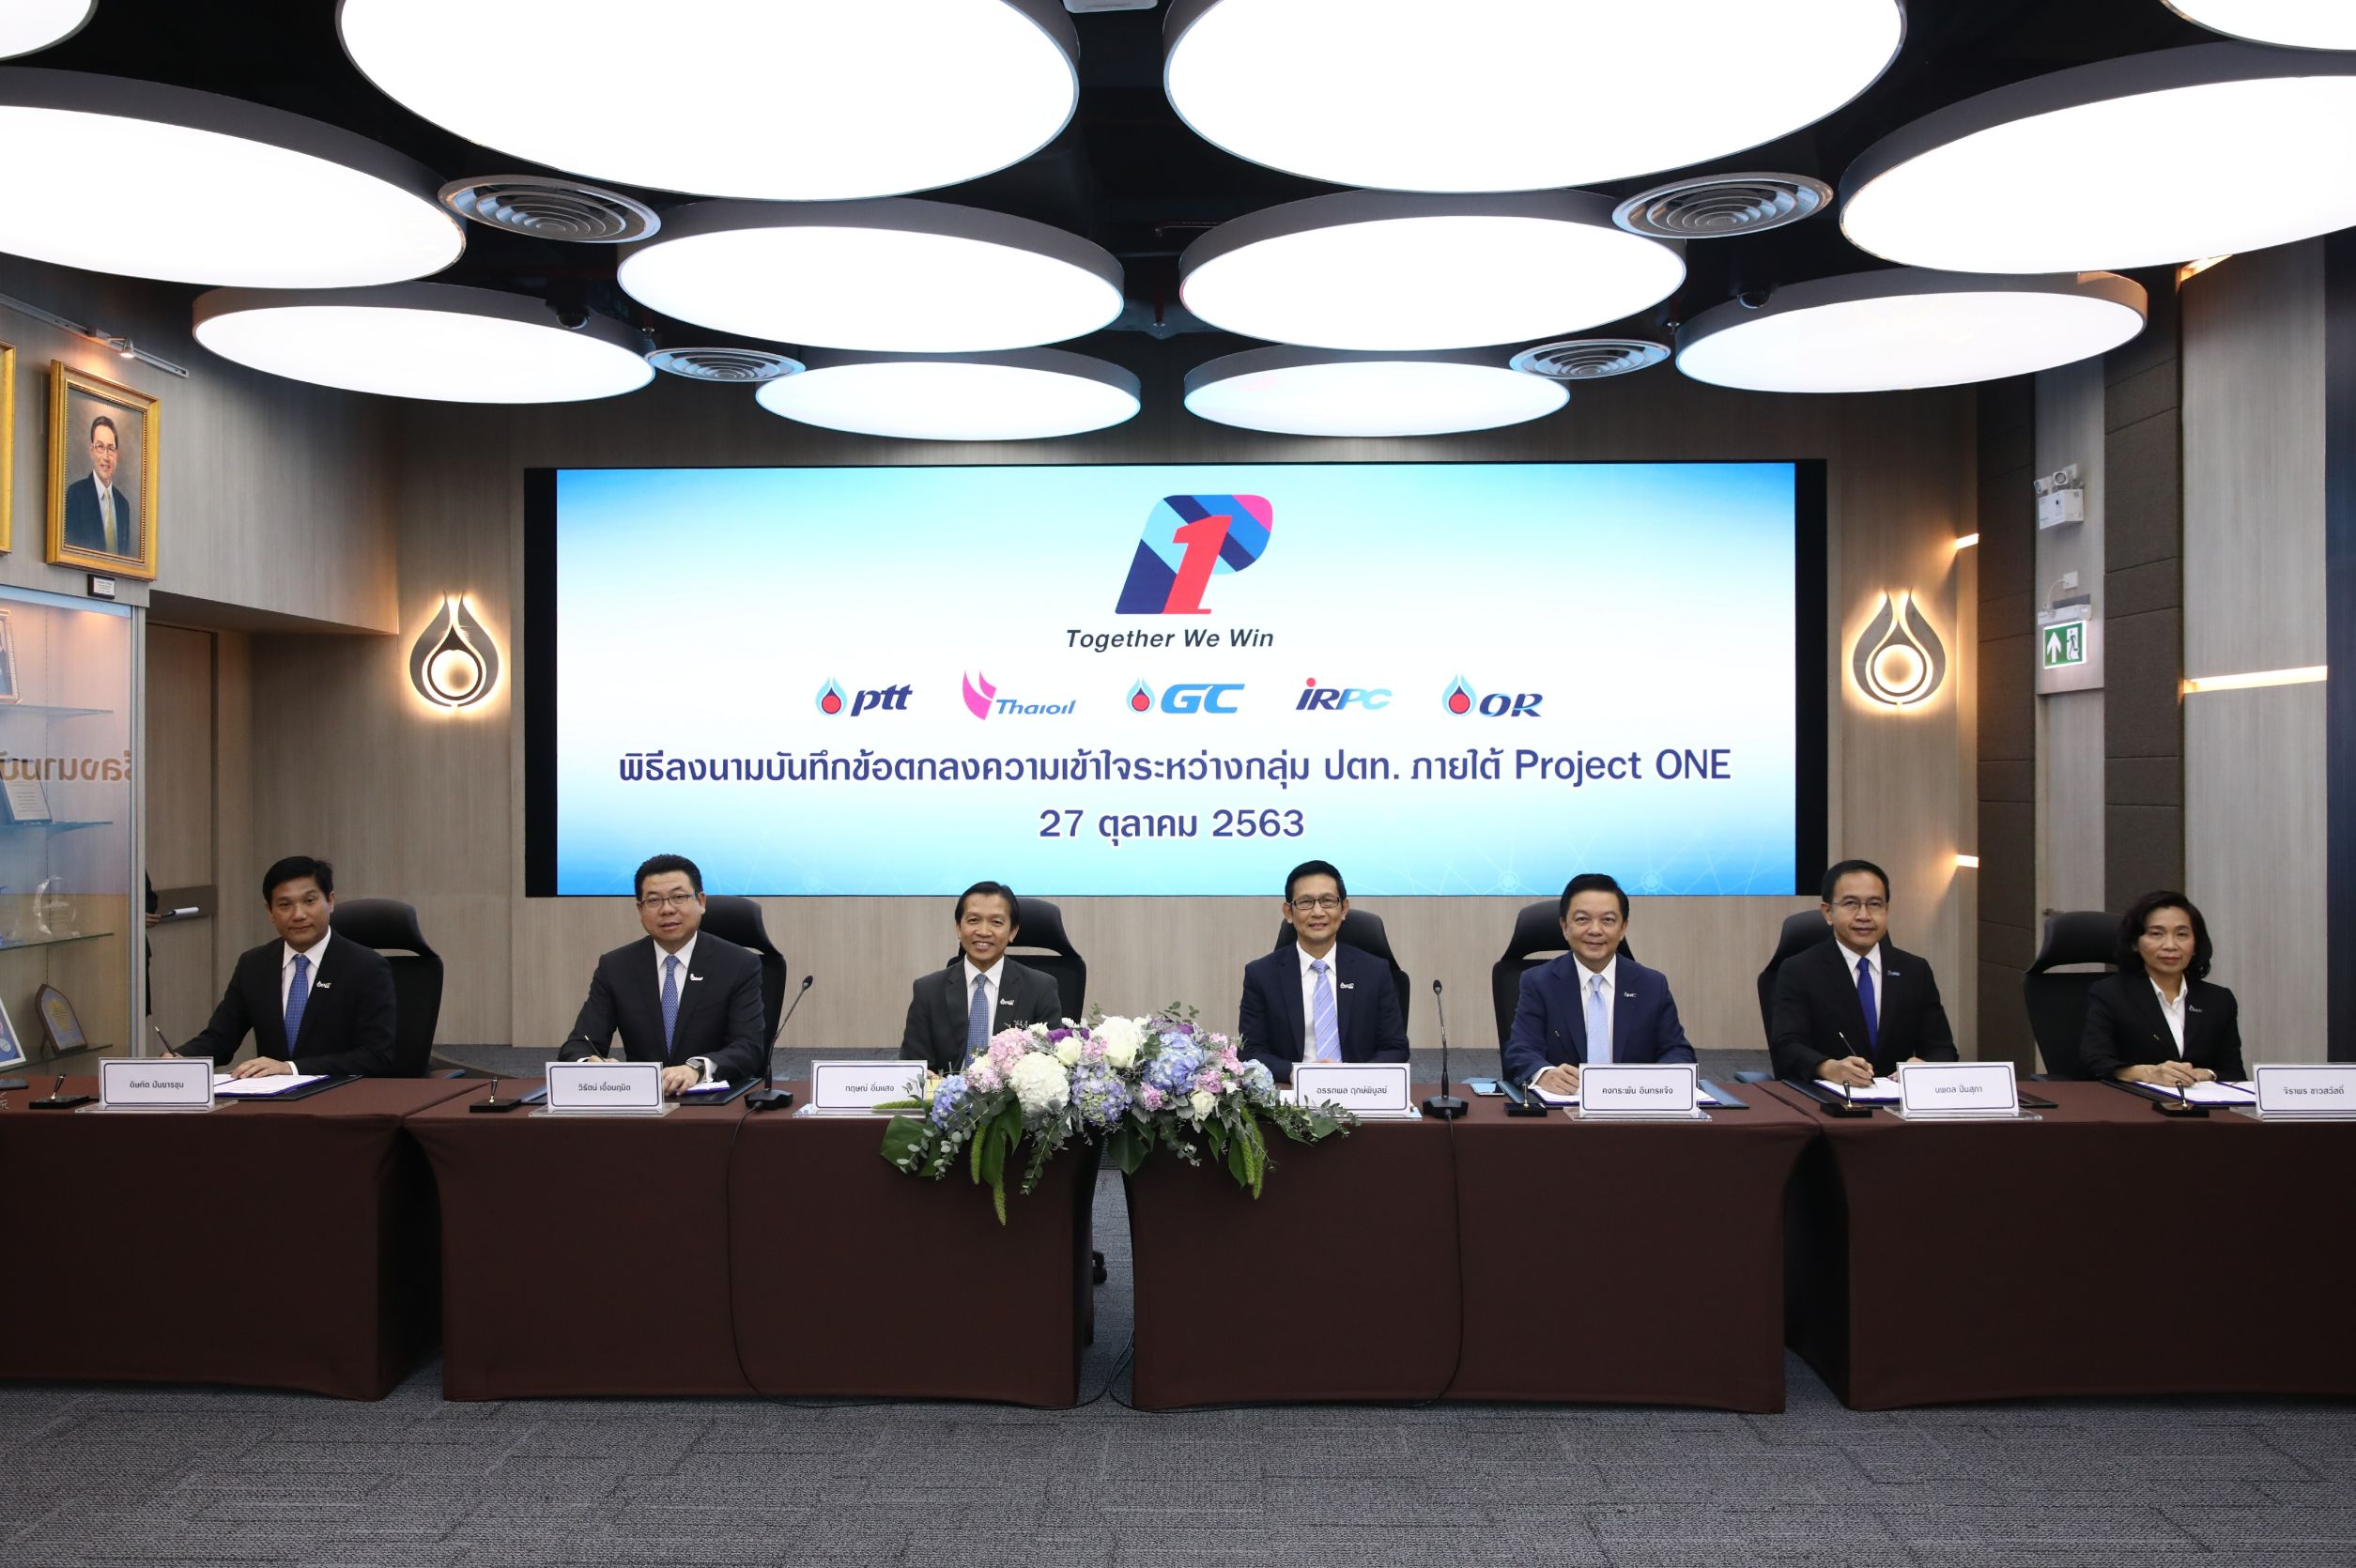 PTT Group join together to sign a Memorandum of Understanding under Project ONE